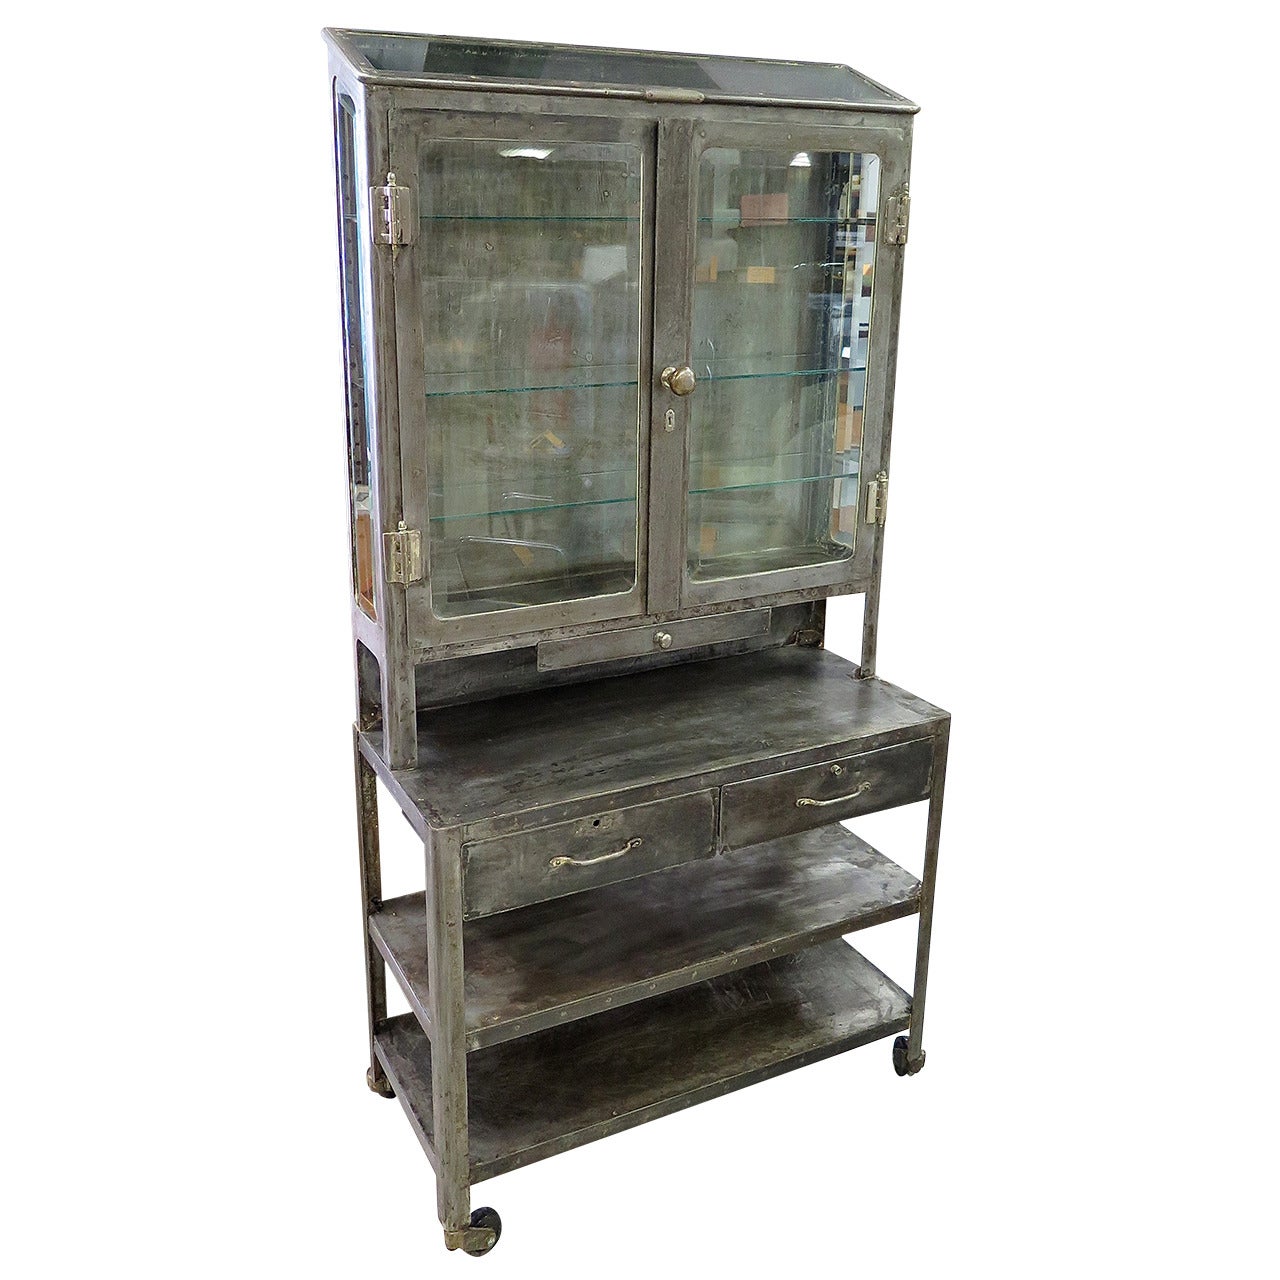 Phenomenal 1940s Medical Cabinet with Nickel Hardware